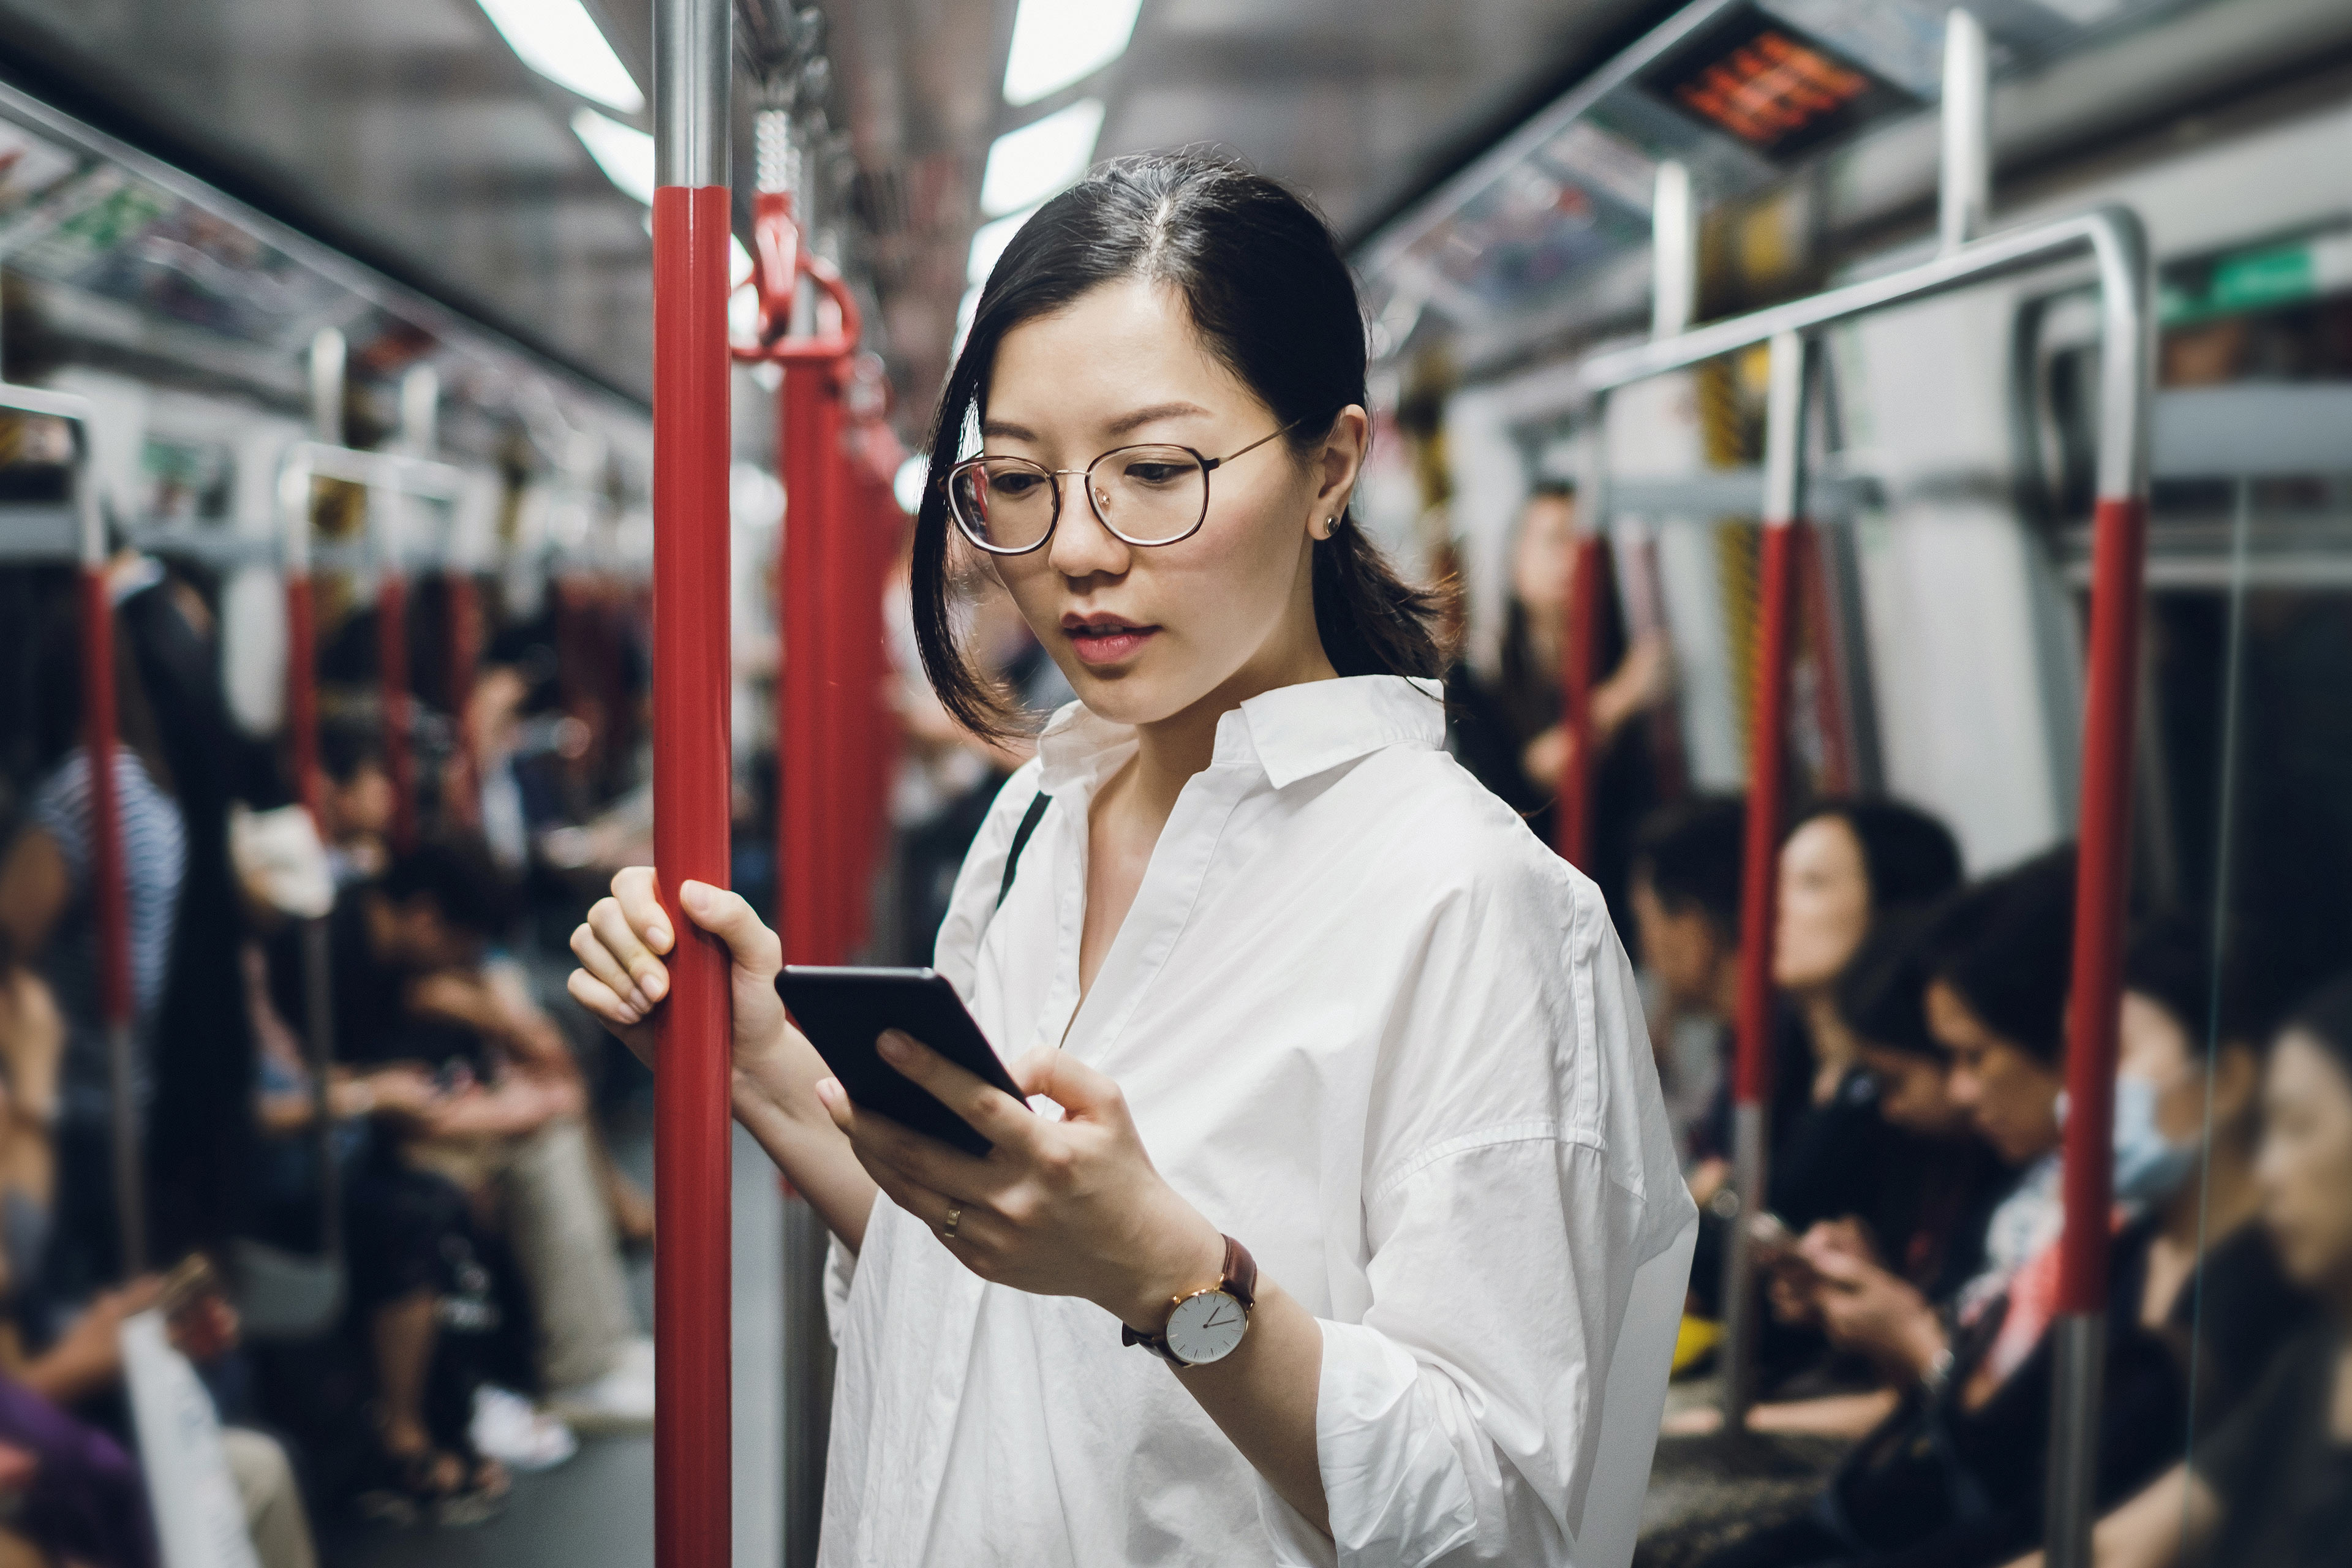 Woman in glasses checks phone on commute